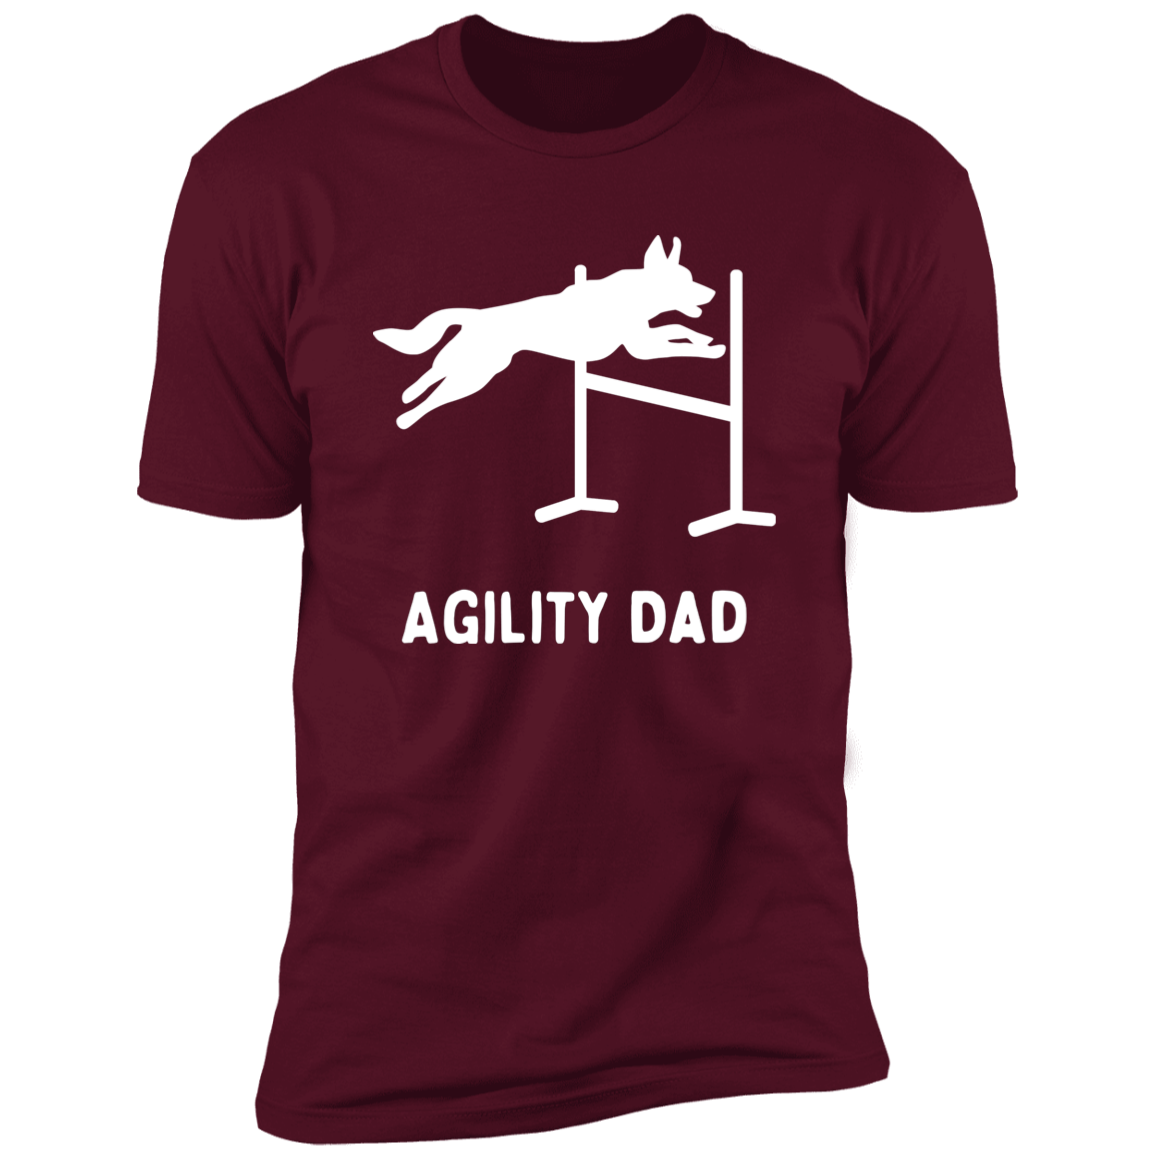 Agility Dad Agility Dog Dog T-Shirt for humans, in maroon